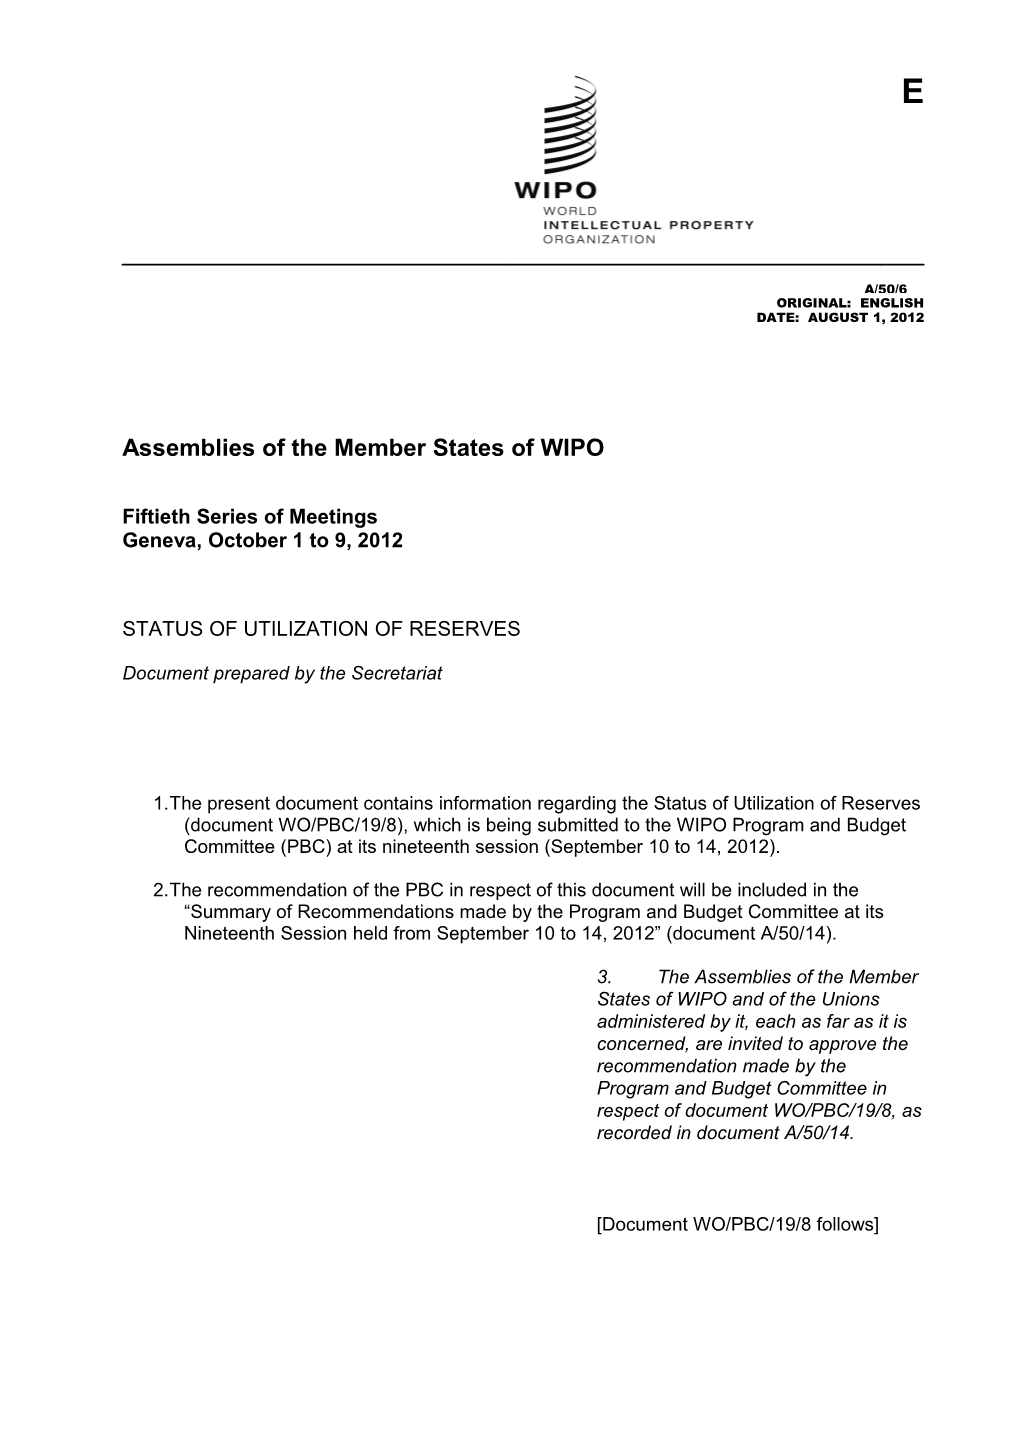 Assemblies of the Member States of WIPO s9